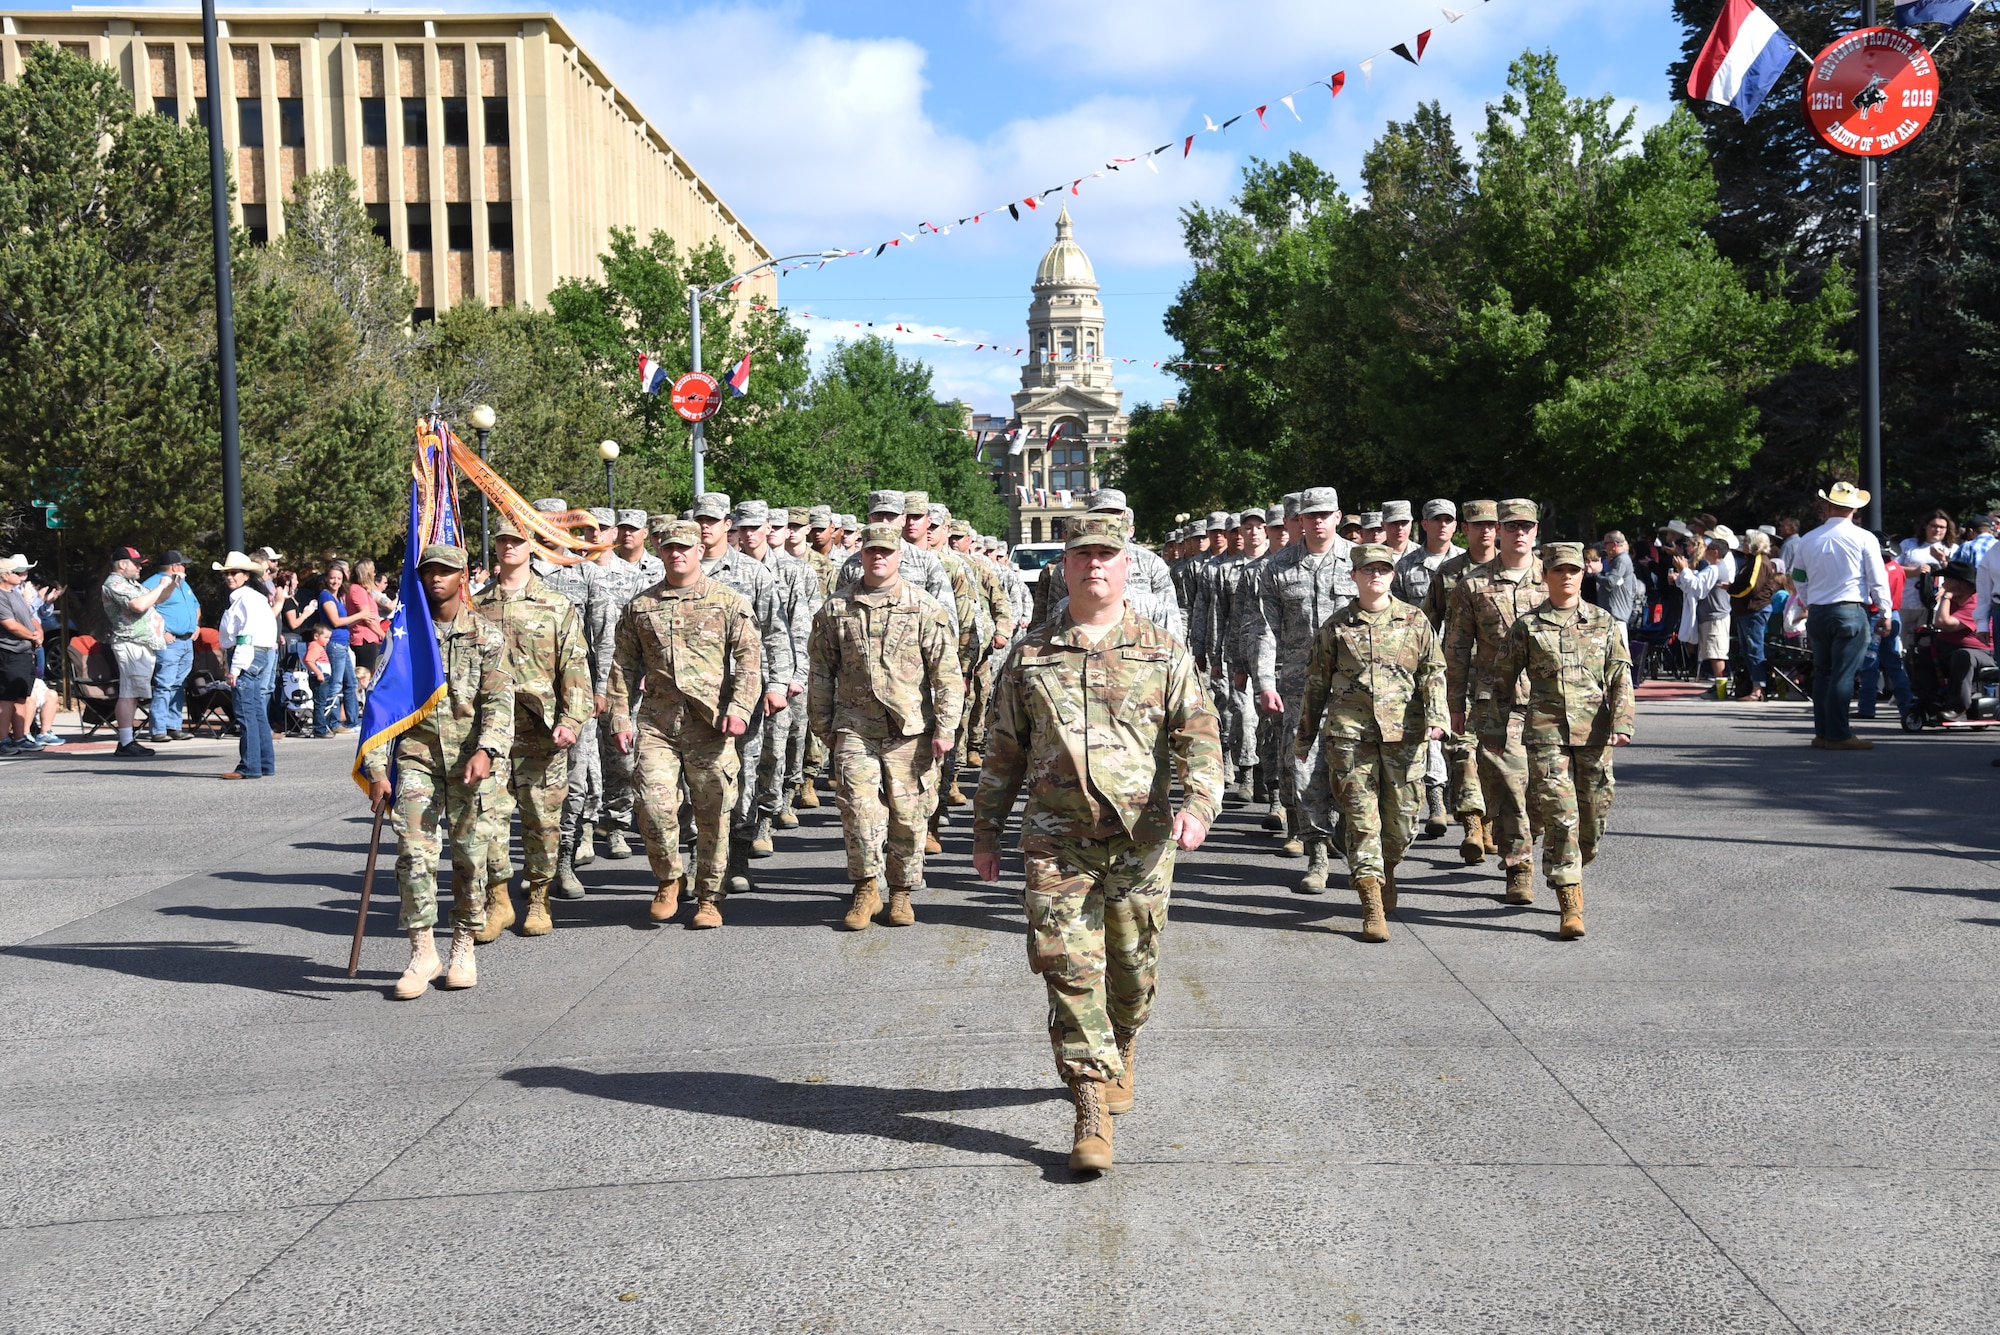 Col. Brian Young, 90th Missile Wing Vice Commander, leads a flight of approximately 150 Airmen during the 123rd Cheyenne Frontier Days opening Grand Parade in Cheyenne, Wyo., July 20, 2019. CFD represents the continuous partnership between F.E. Warren Air Force Base and the Cheyenne community. The F.E. Warren Air Force Base and Cheyenne communities came together to celebrate the CFD rodeo and festival, which runs from July 19-28. (U.S. Air Force photo by Glenn S. Robertson)